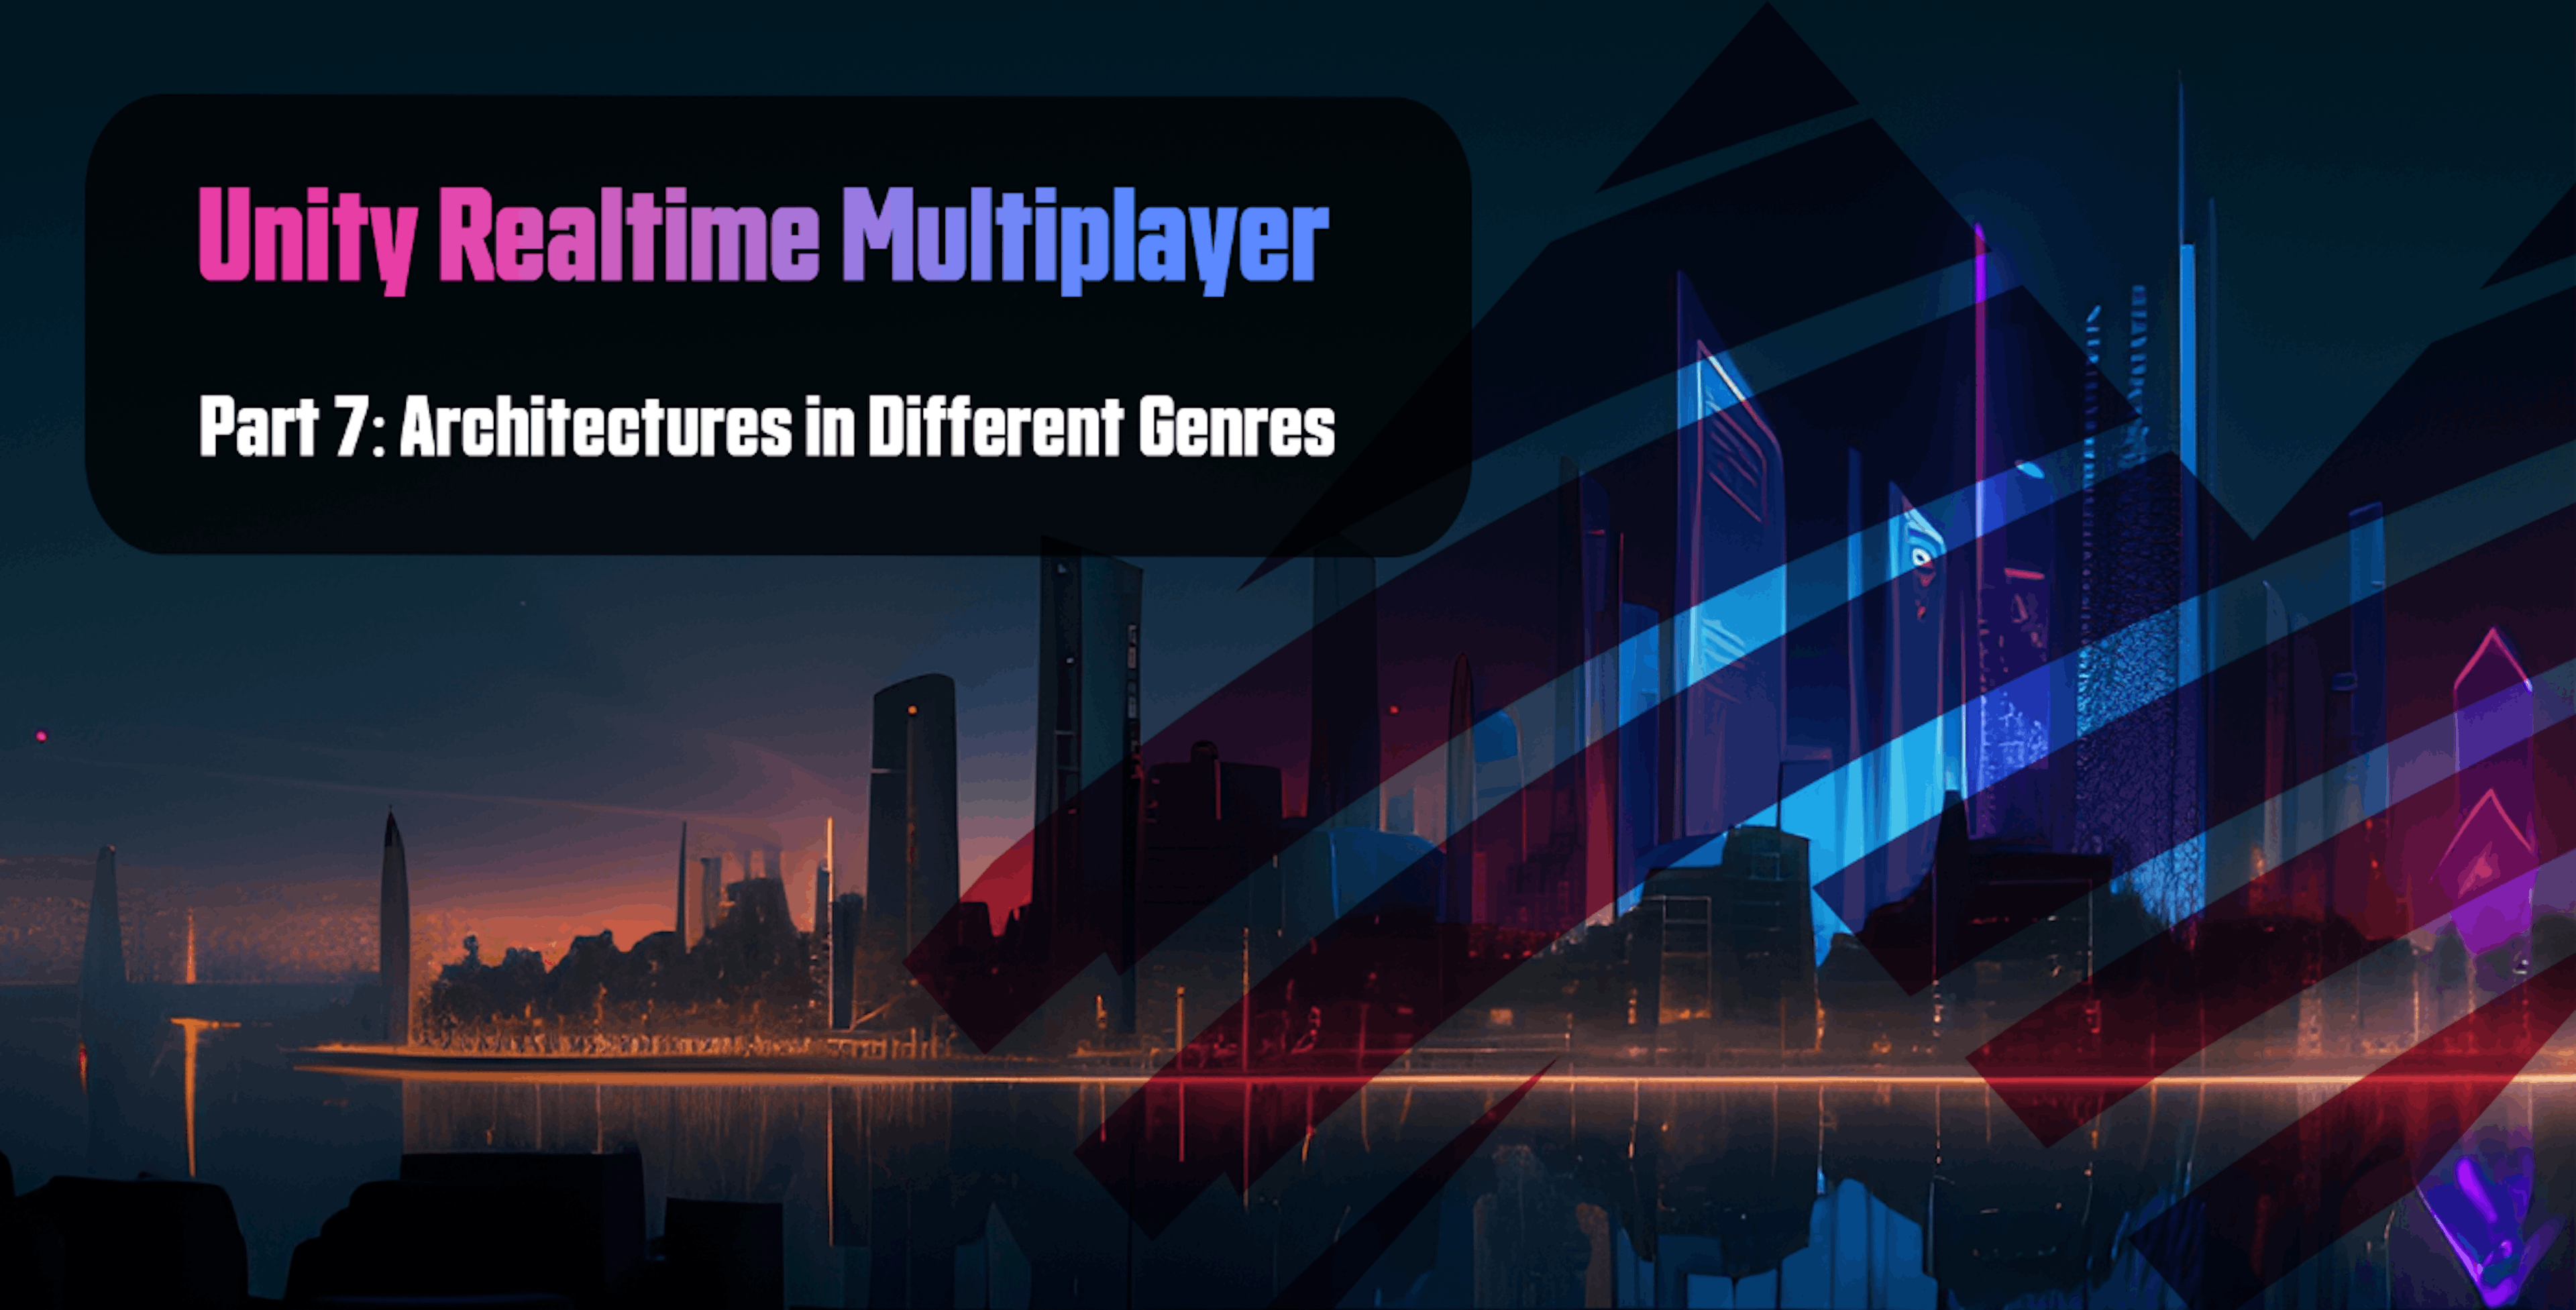 featured image - Unity Realtime Multiplayer, Part 7: Architectures in Different Genres